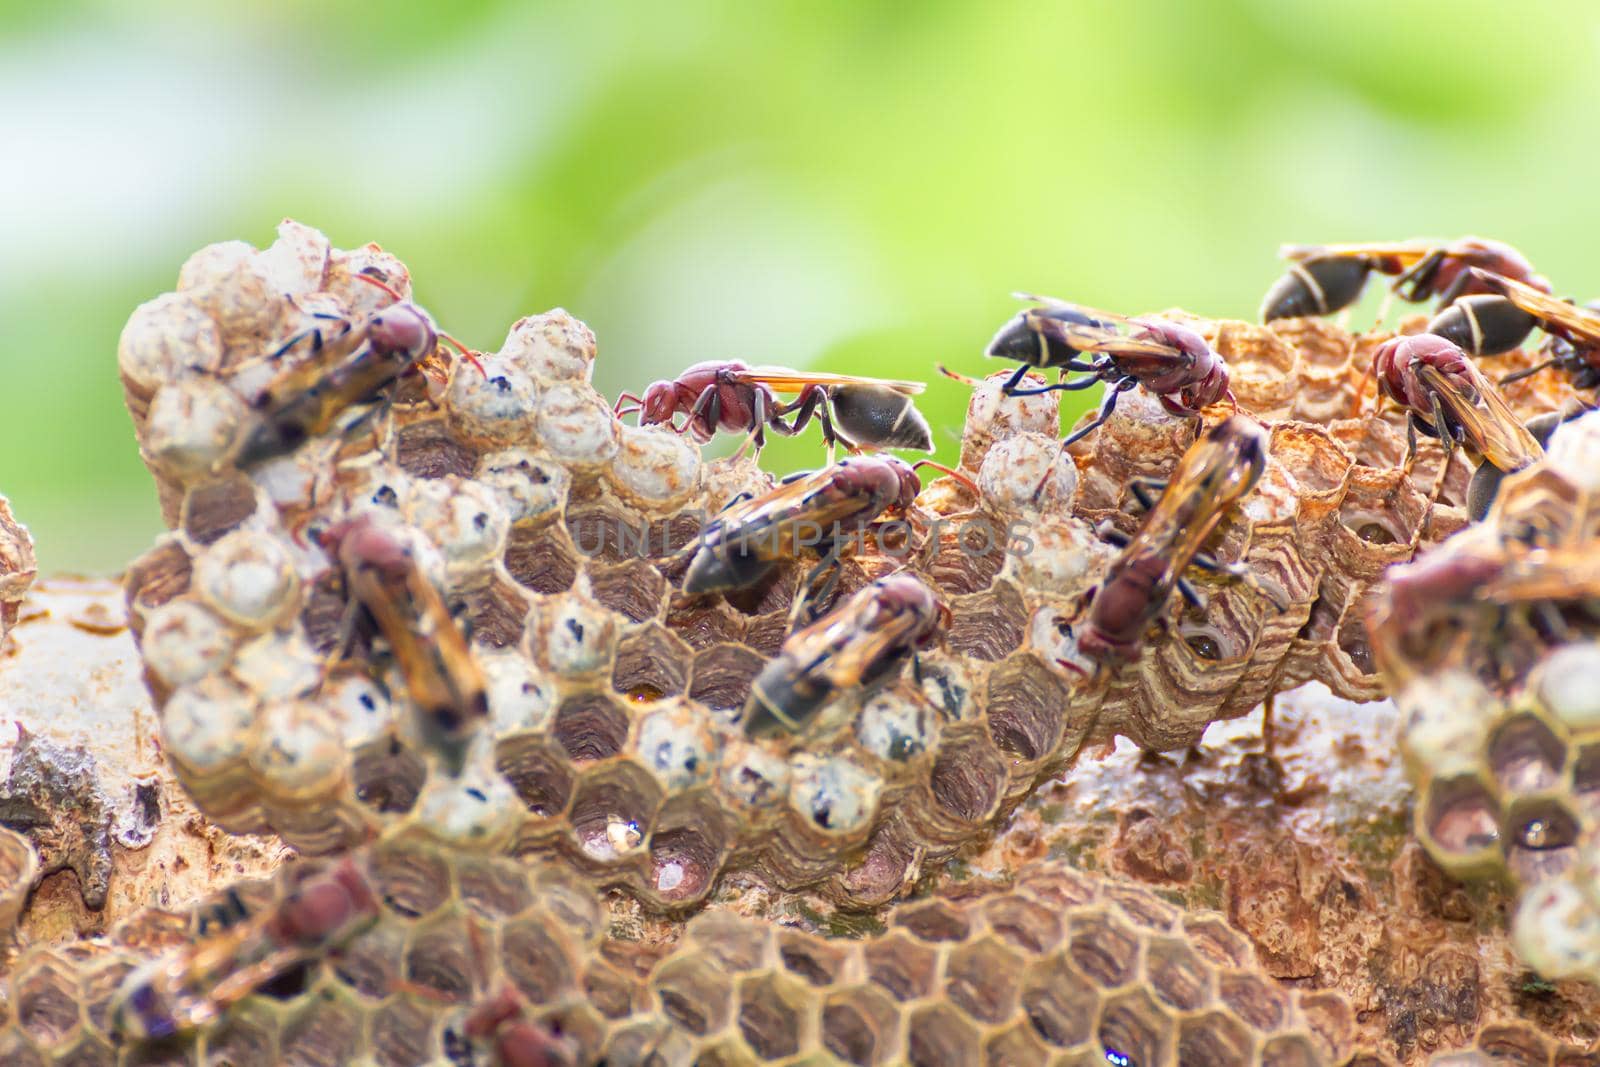 Close-up of wasp and wasp nest with eggs and larvae in nature